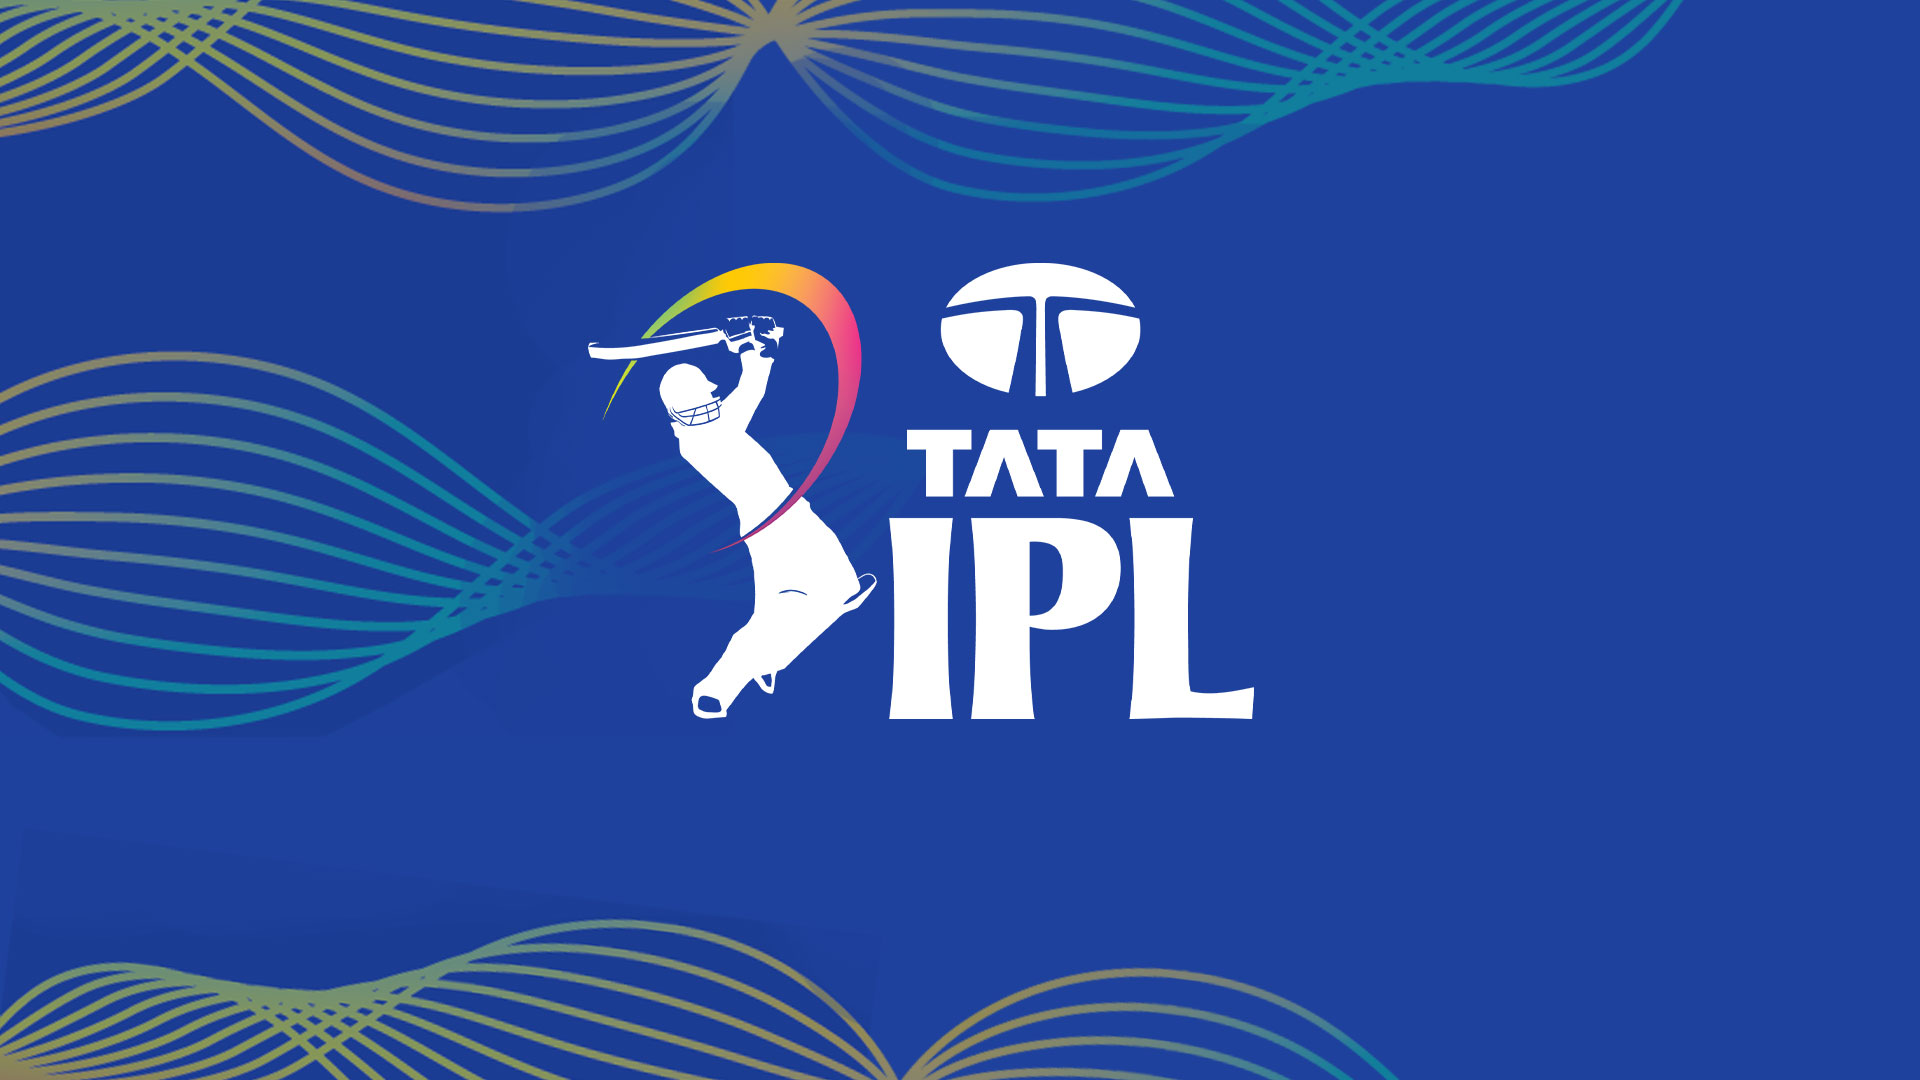 Watch IPL 2022 Live Free: Here’s How You Can Watch IPL 2022 For Free With These Plans